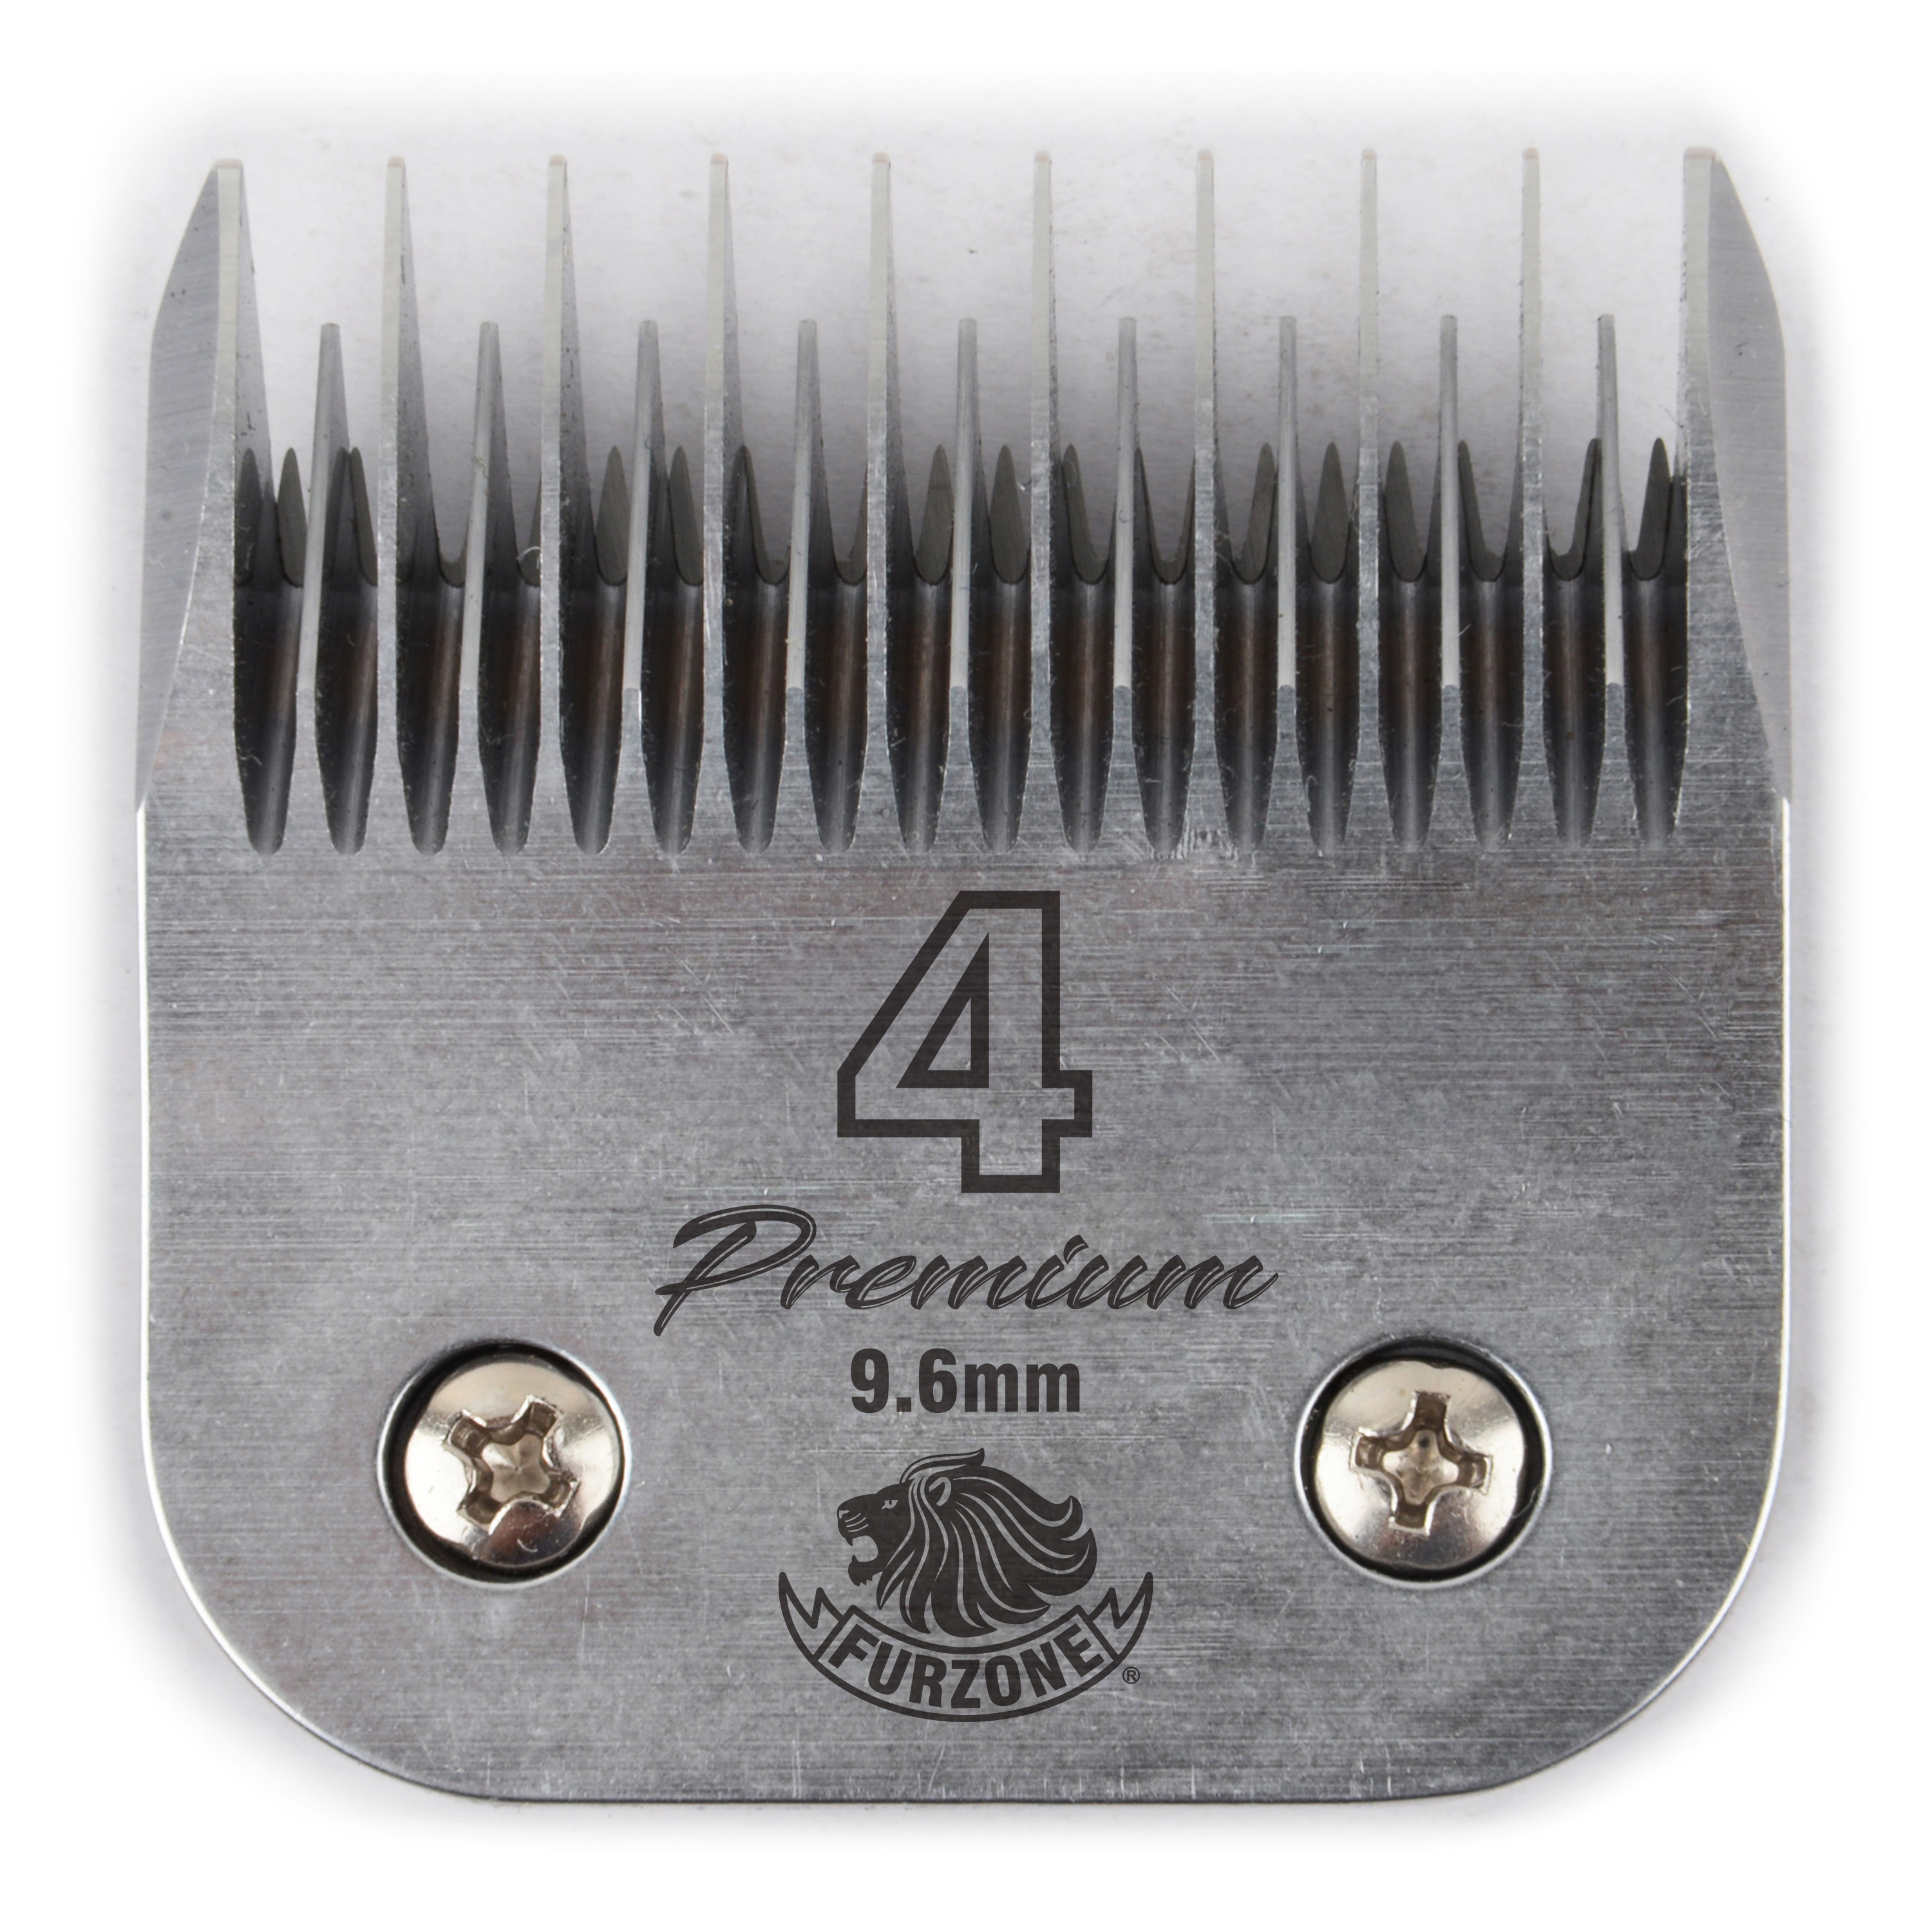 Furzone #4-9.6mm-Skip Teeth Professional A5 Detachable Blade - Made Of Extra Durable Japanese Steel